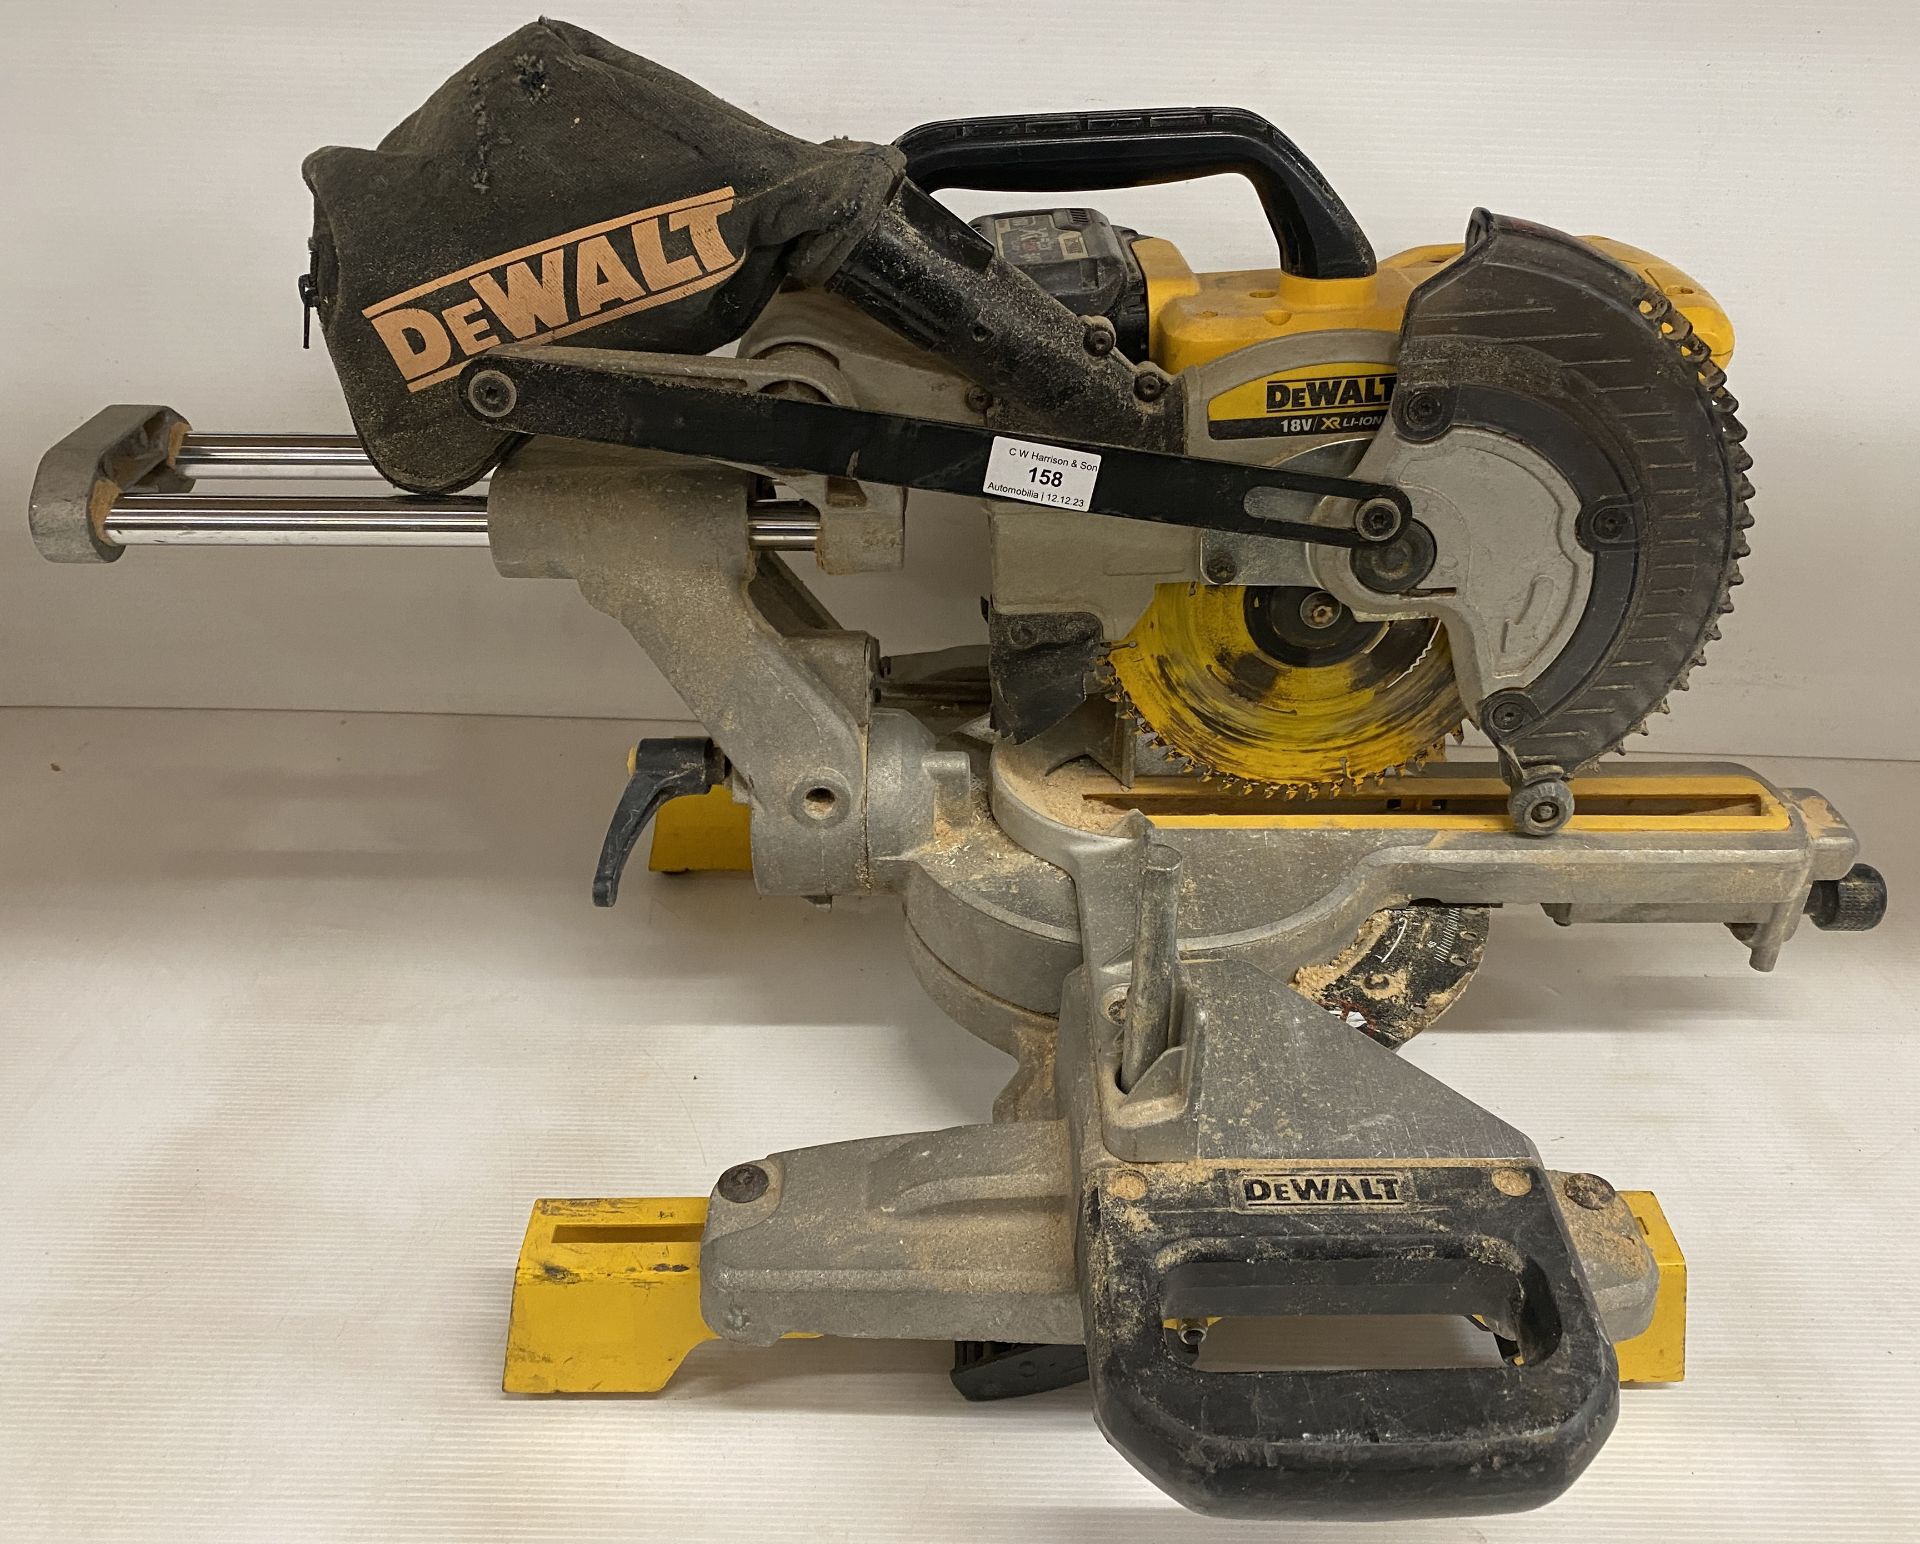 DeWalt 18-volt battery operated table-top crosscut bench saw (sold as seen) (saleroom location: